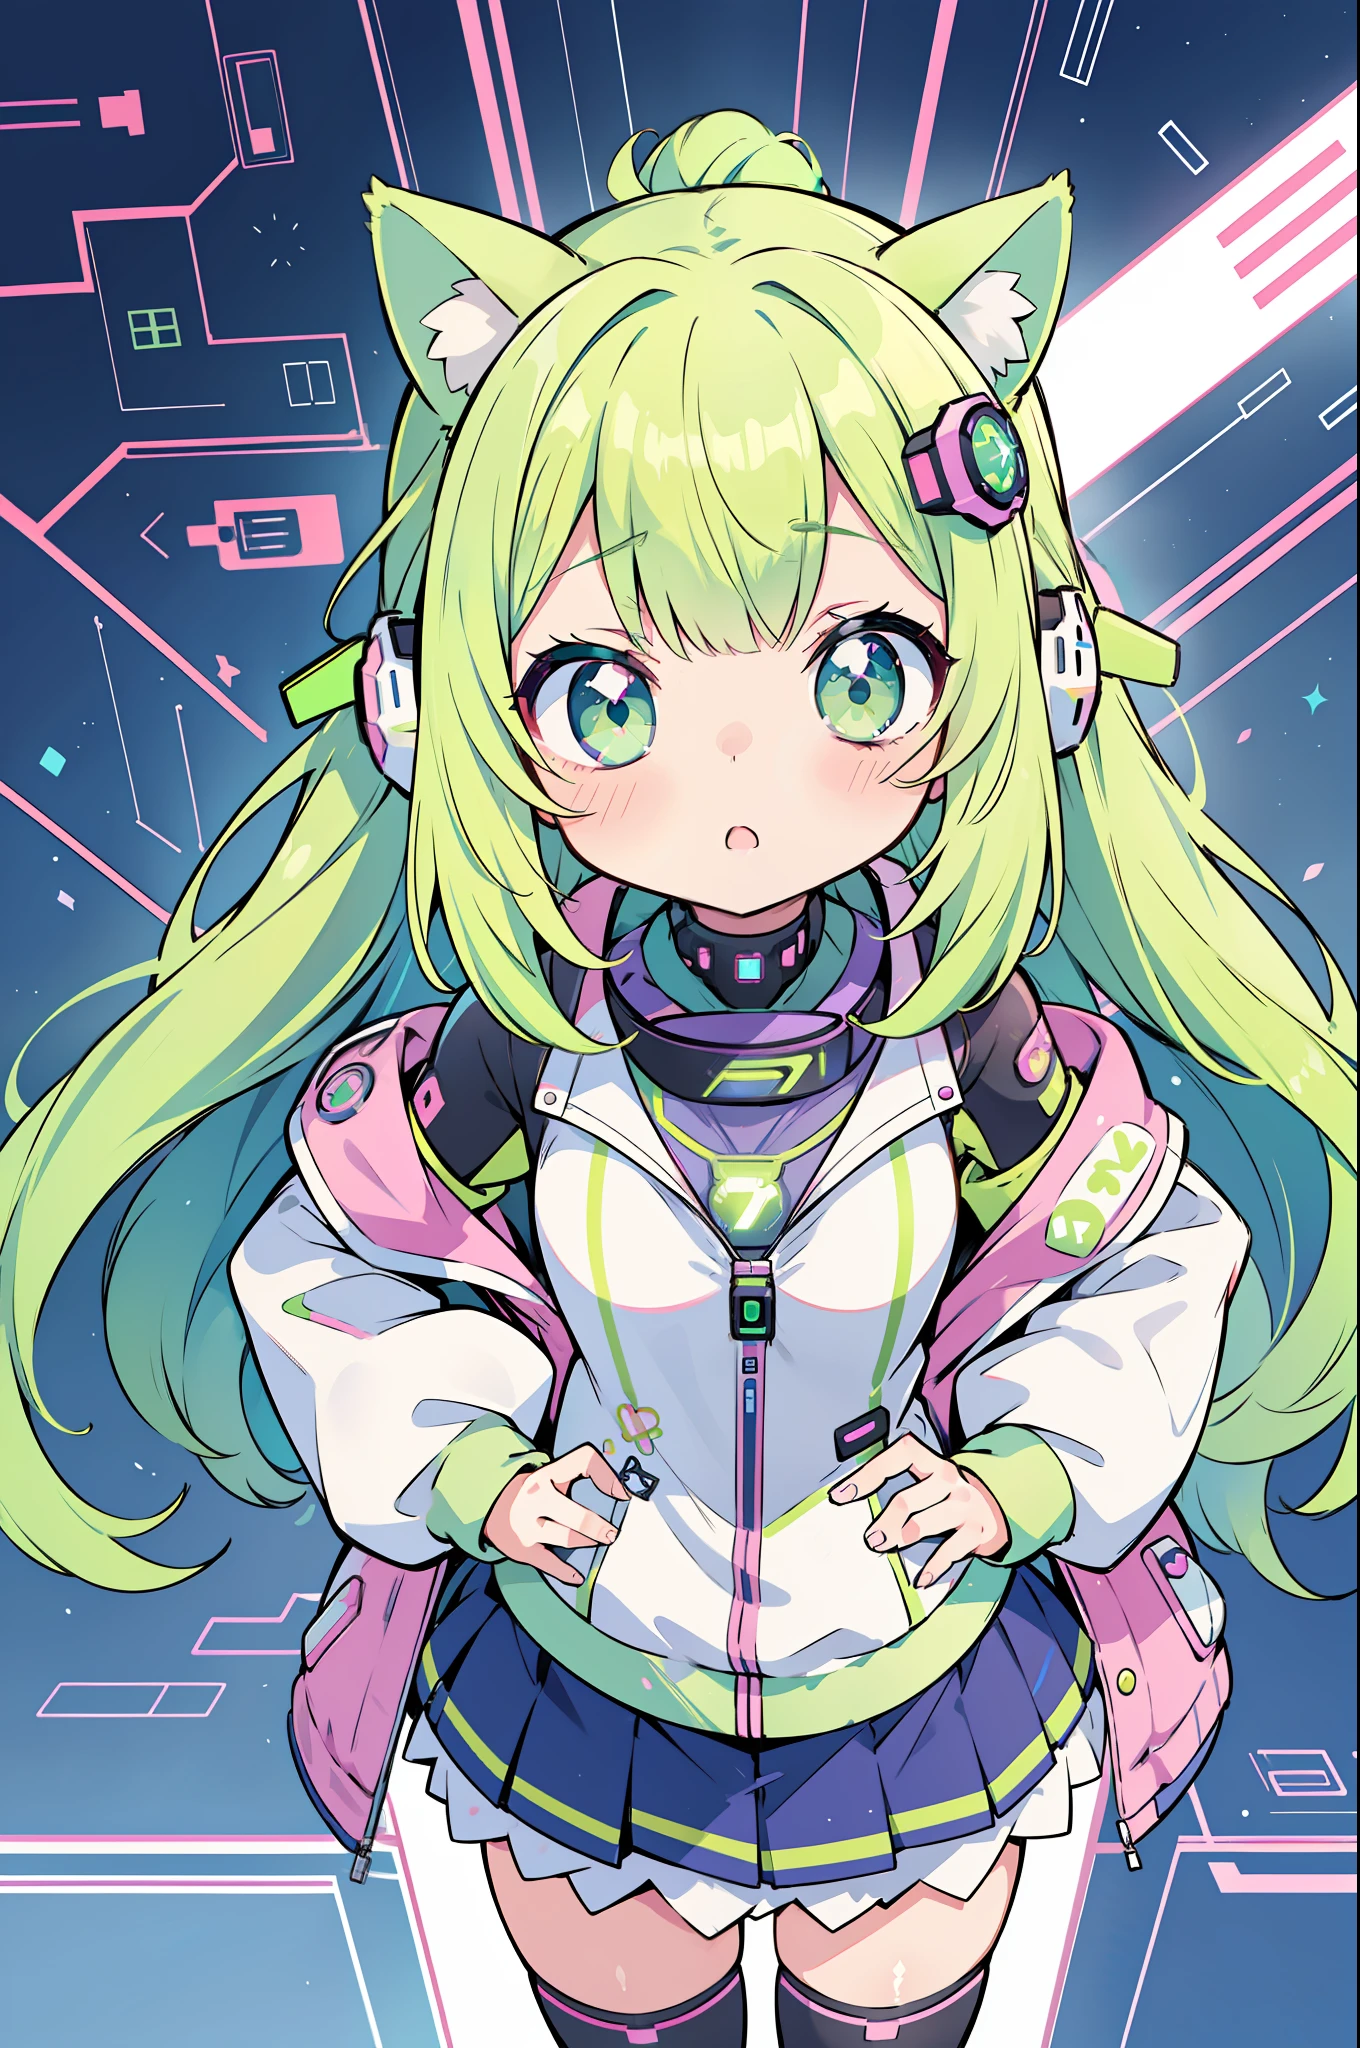 1girl, decora, dynamic angle, breath taking, from above, forced perspective, oversized jacket, neko ears, green hair, unicorn horn, cyber goth themed, kawaiitech, pastel colors, kawaii, cute colors, scifi, reelmech, cyborg, robotic parts, cable electric wires, microchip, , kawaii, color palette: green, purple, pink